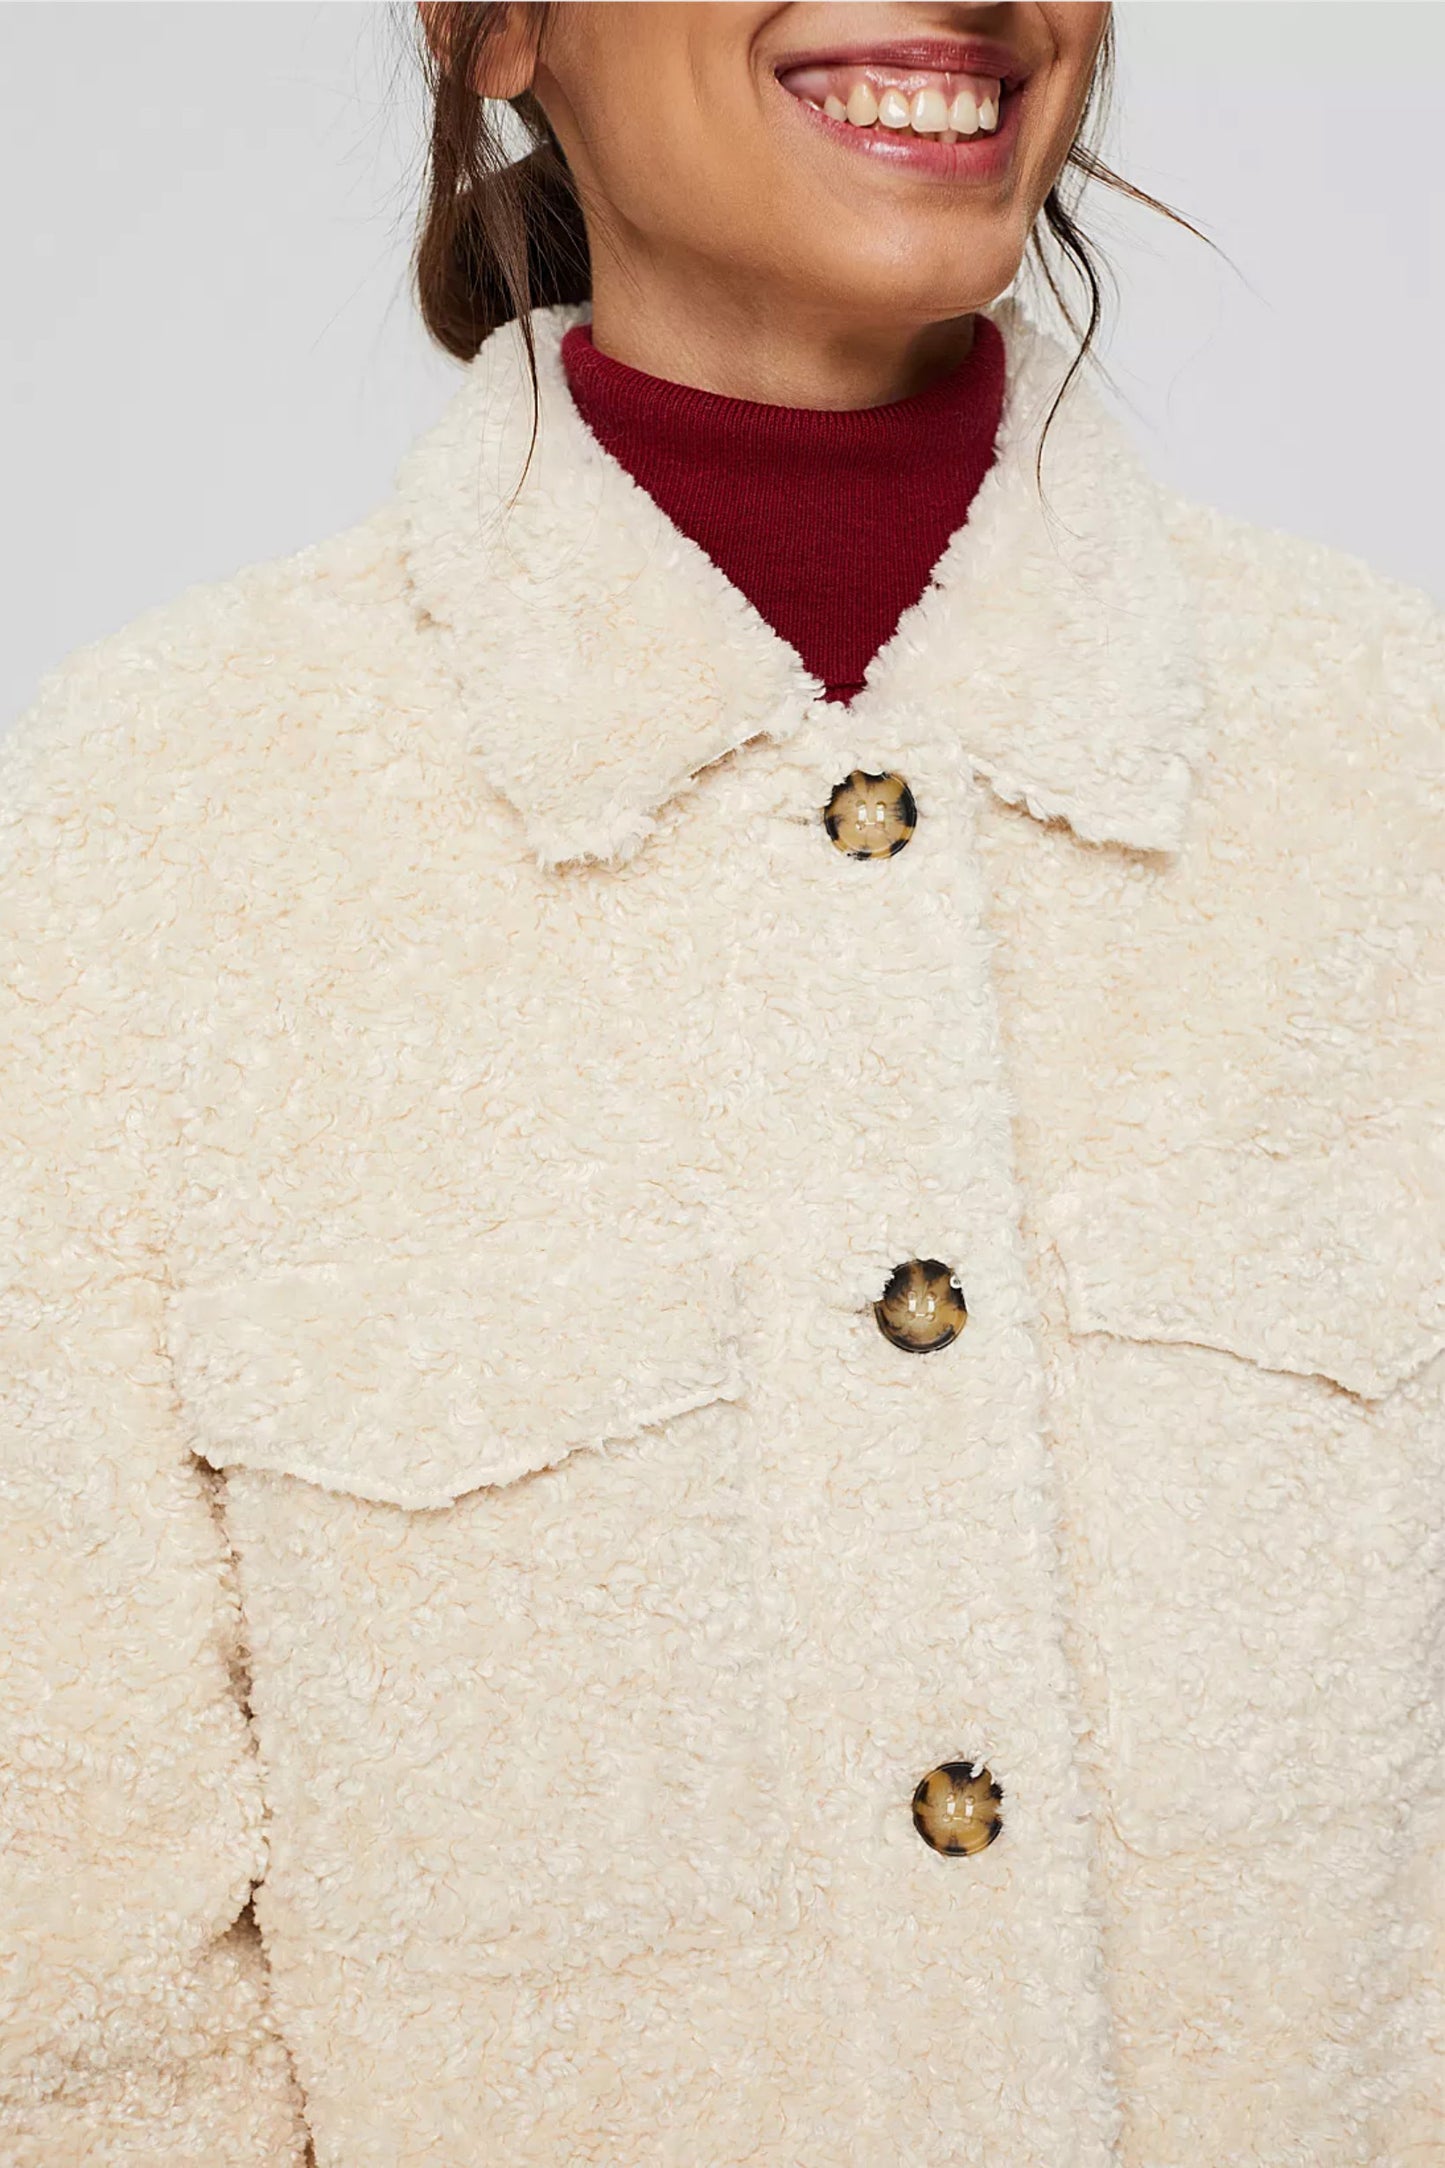 Recycled Faux Shearling Shacket